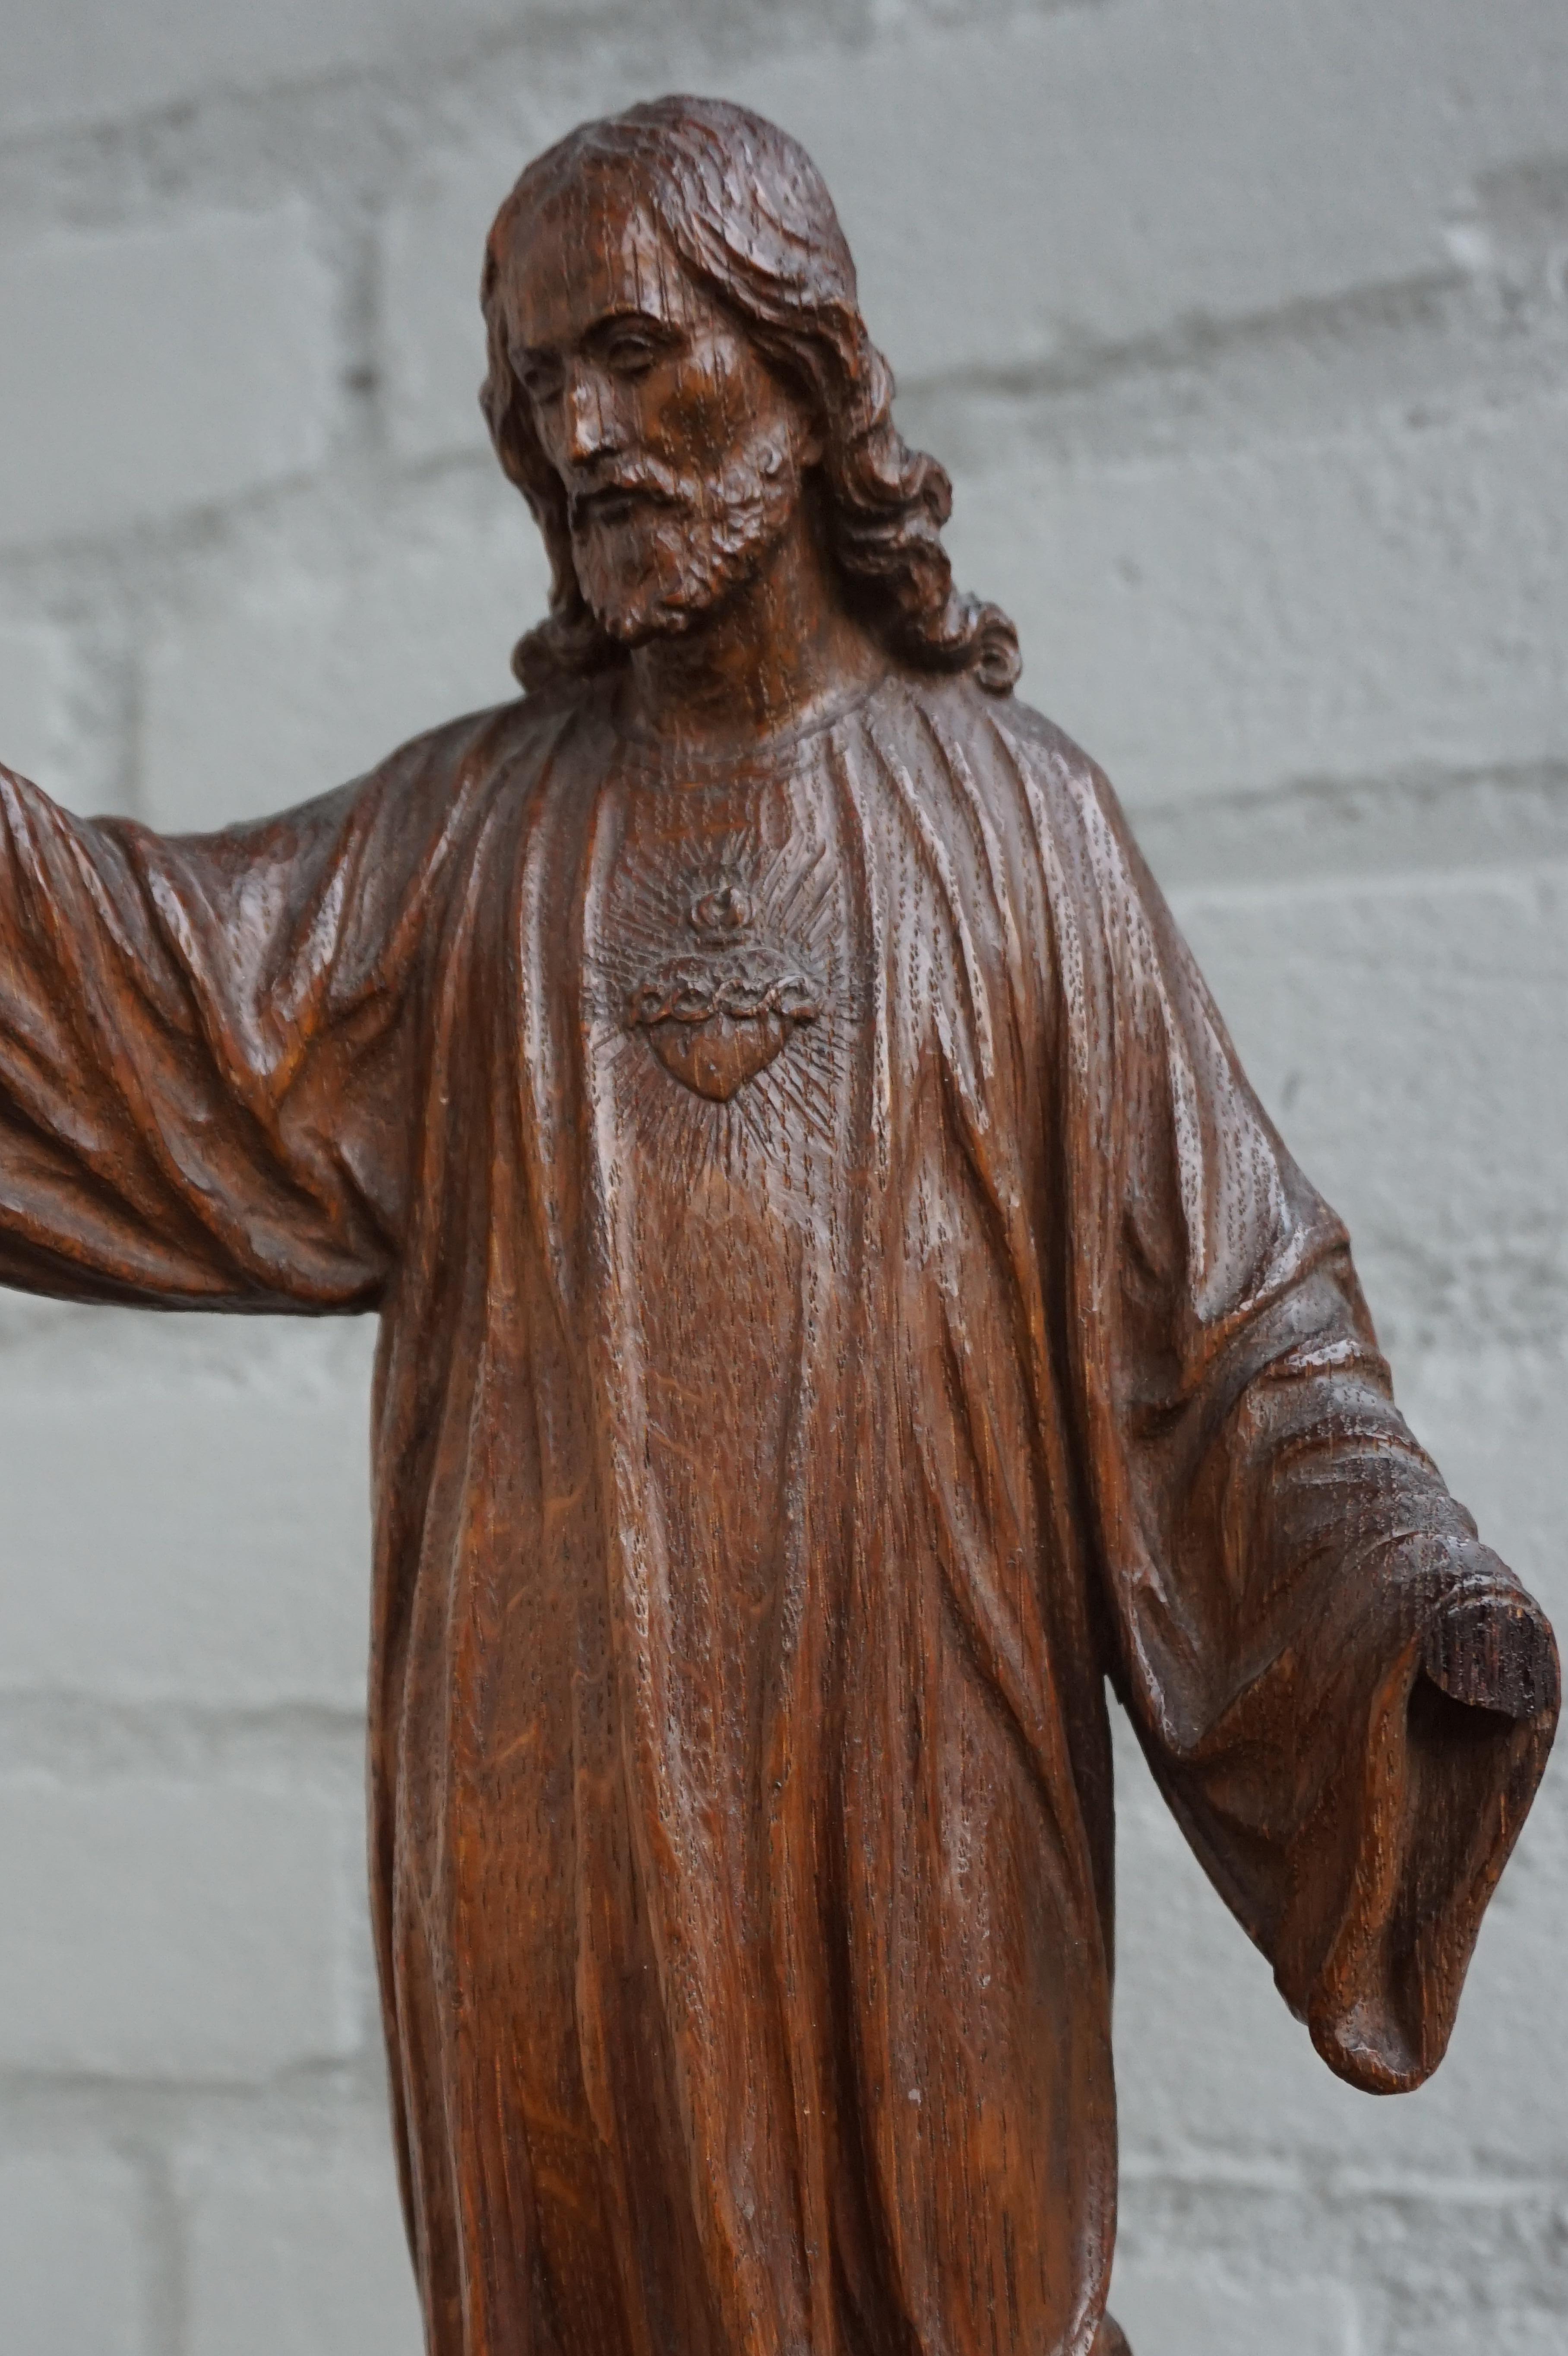 Antique and Hand Carved Sculpture of Our Lord & Teacher Jesus by Bruno Gerrits 1